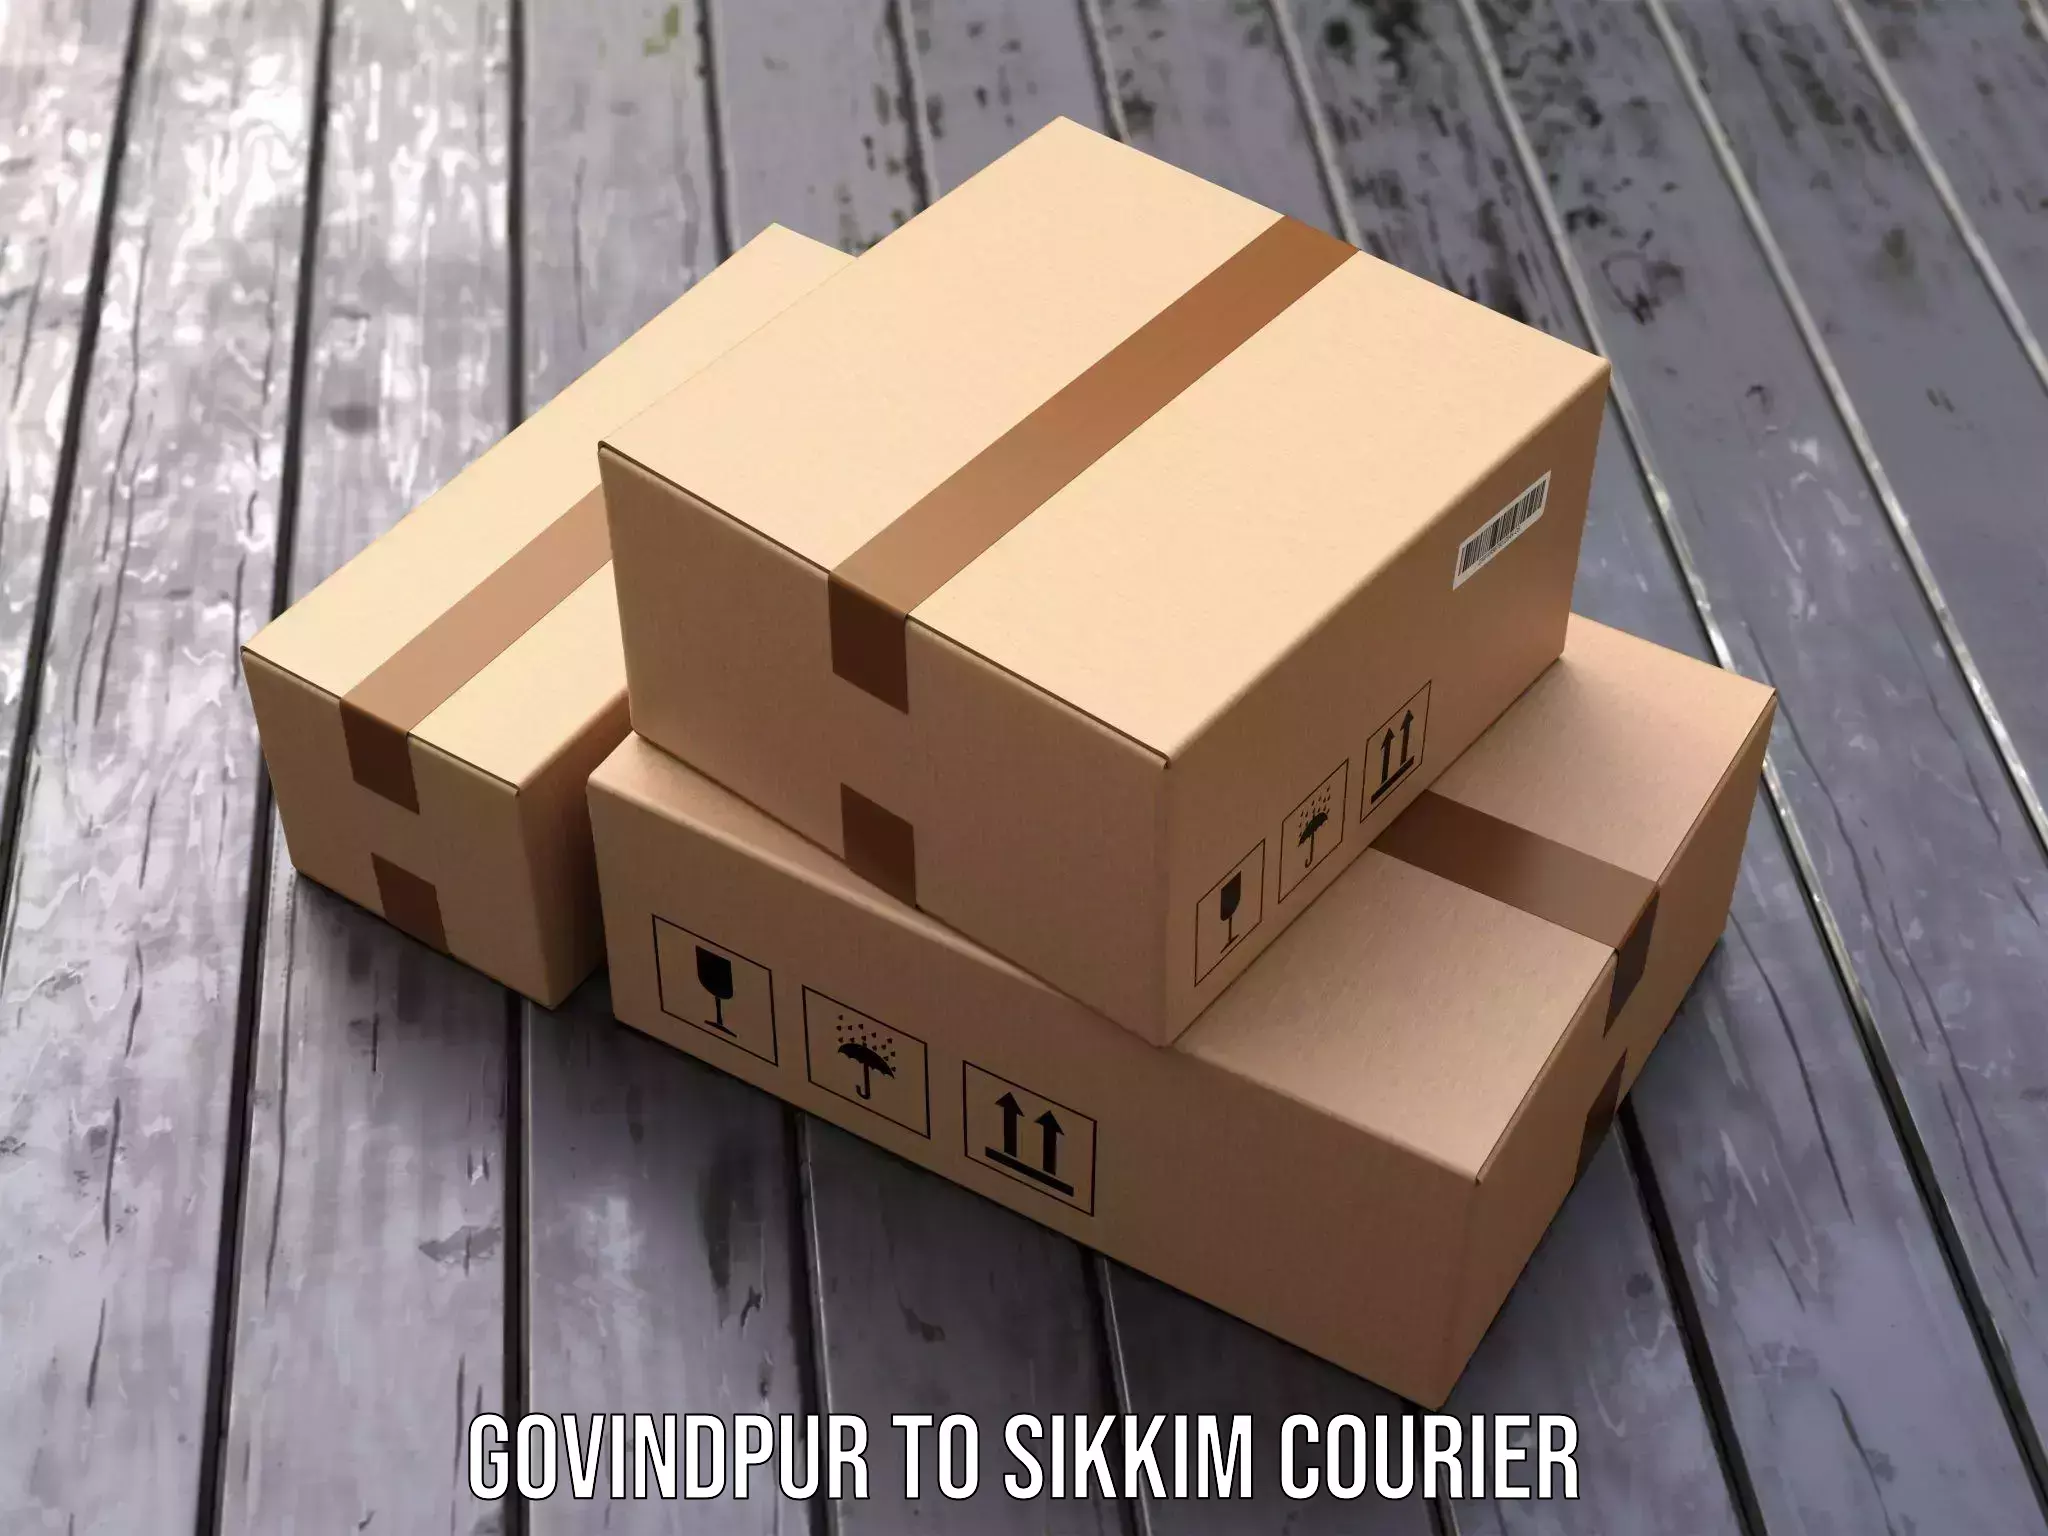 Subscription-based courier Govindpur to Geyzing